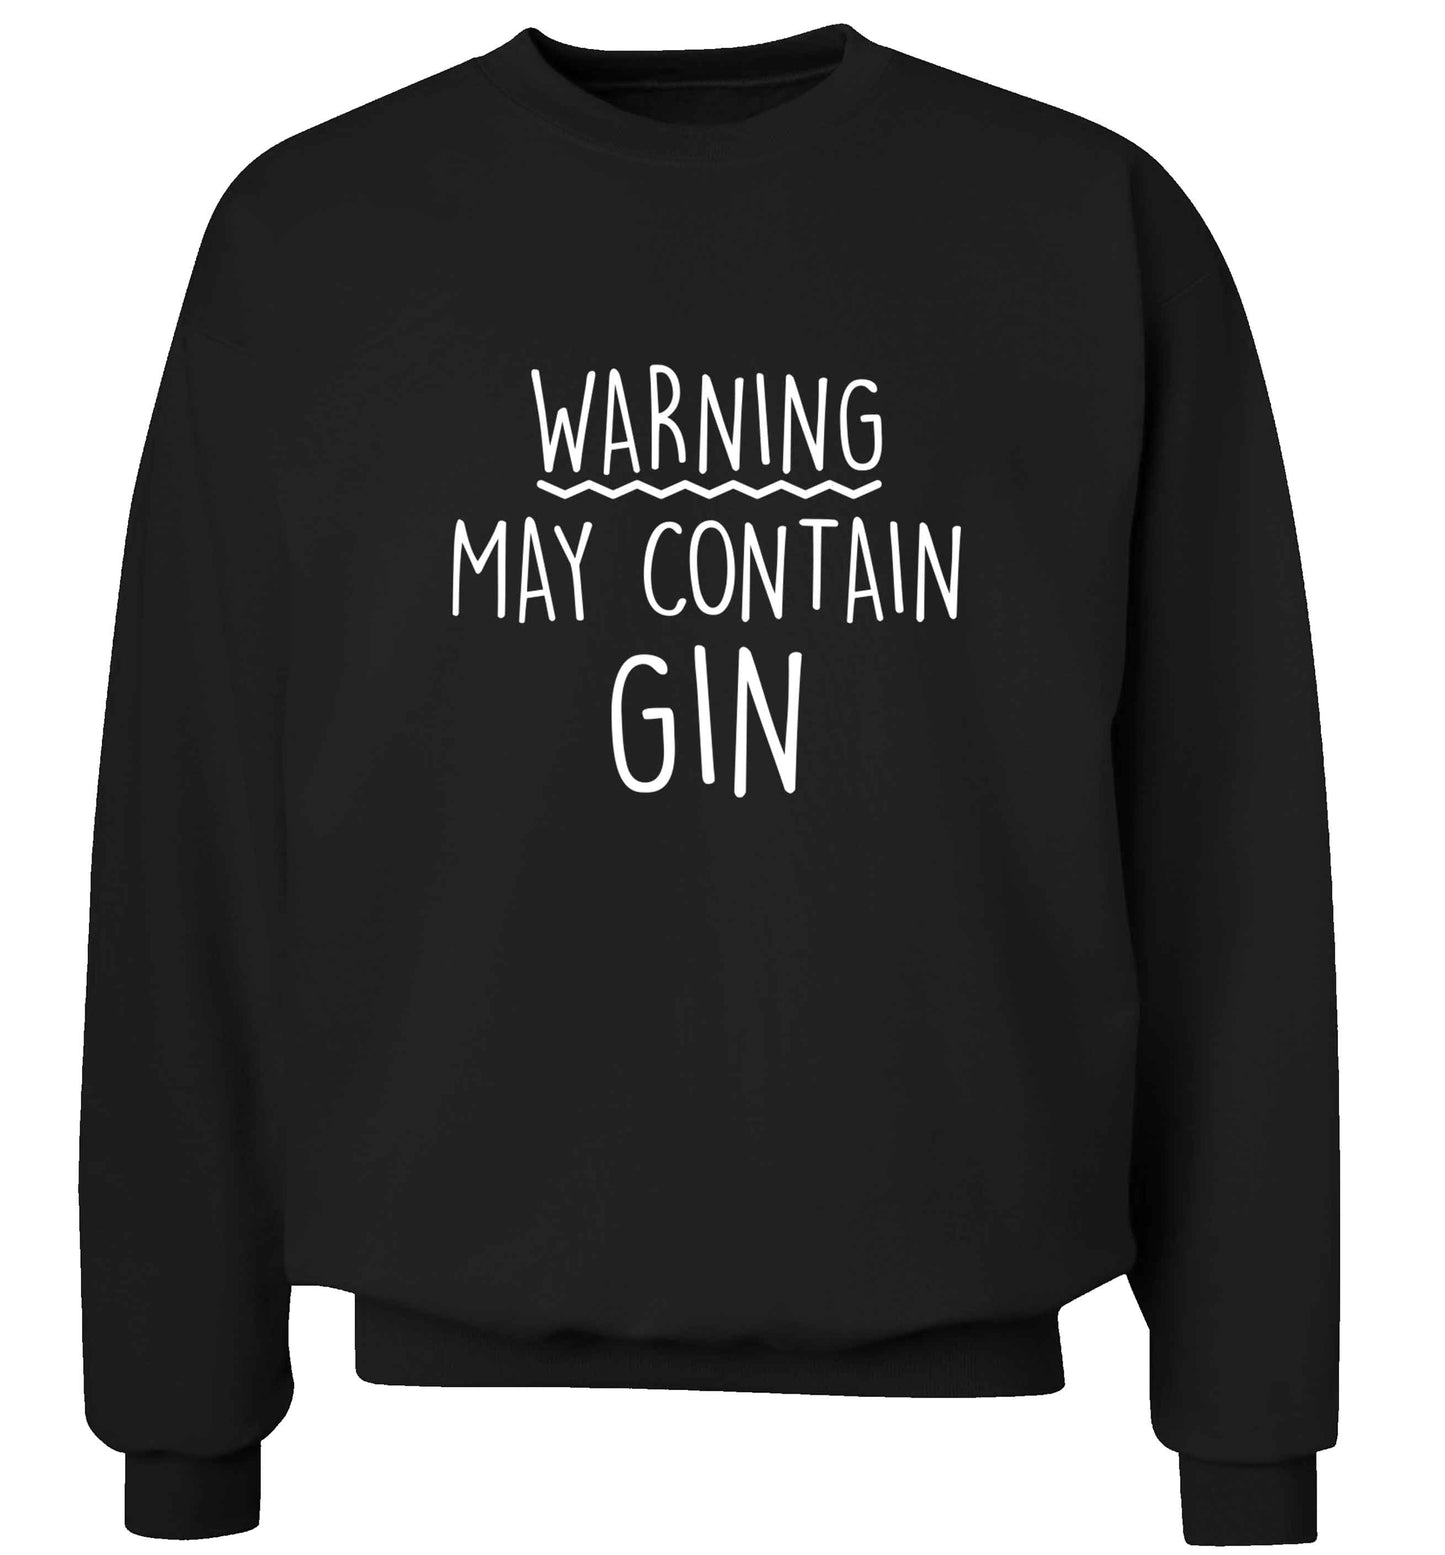 Warning may contain gin adult's unisex black sweater 2XL